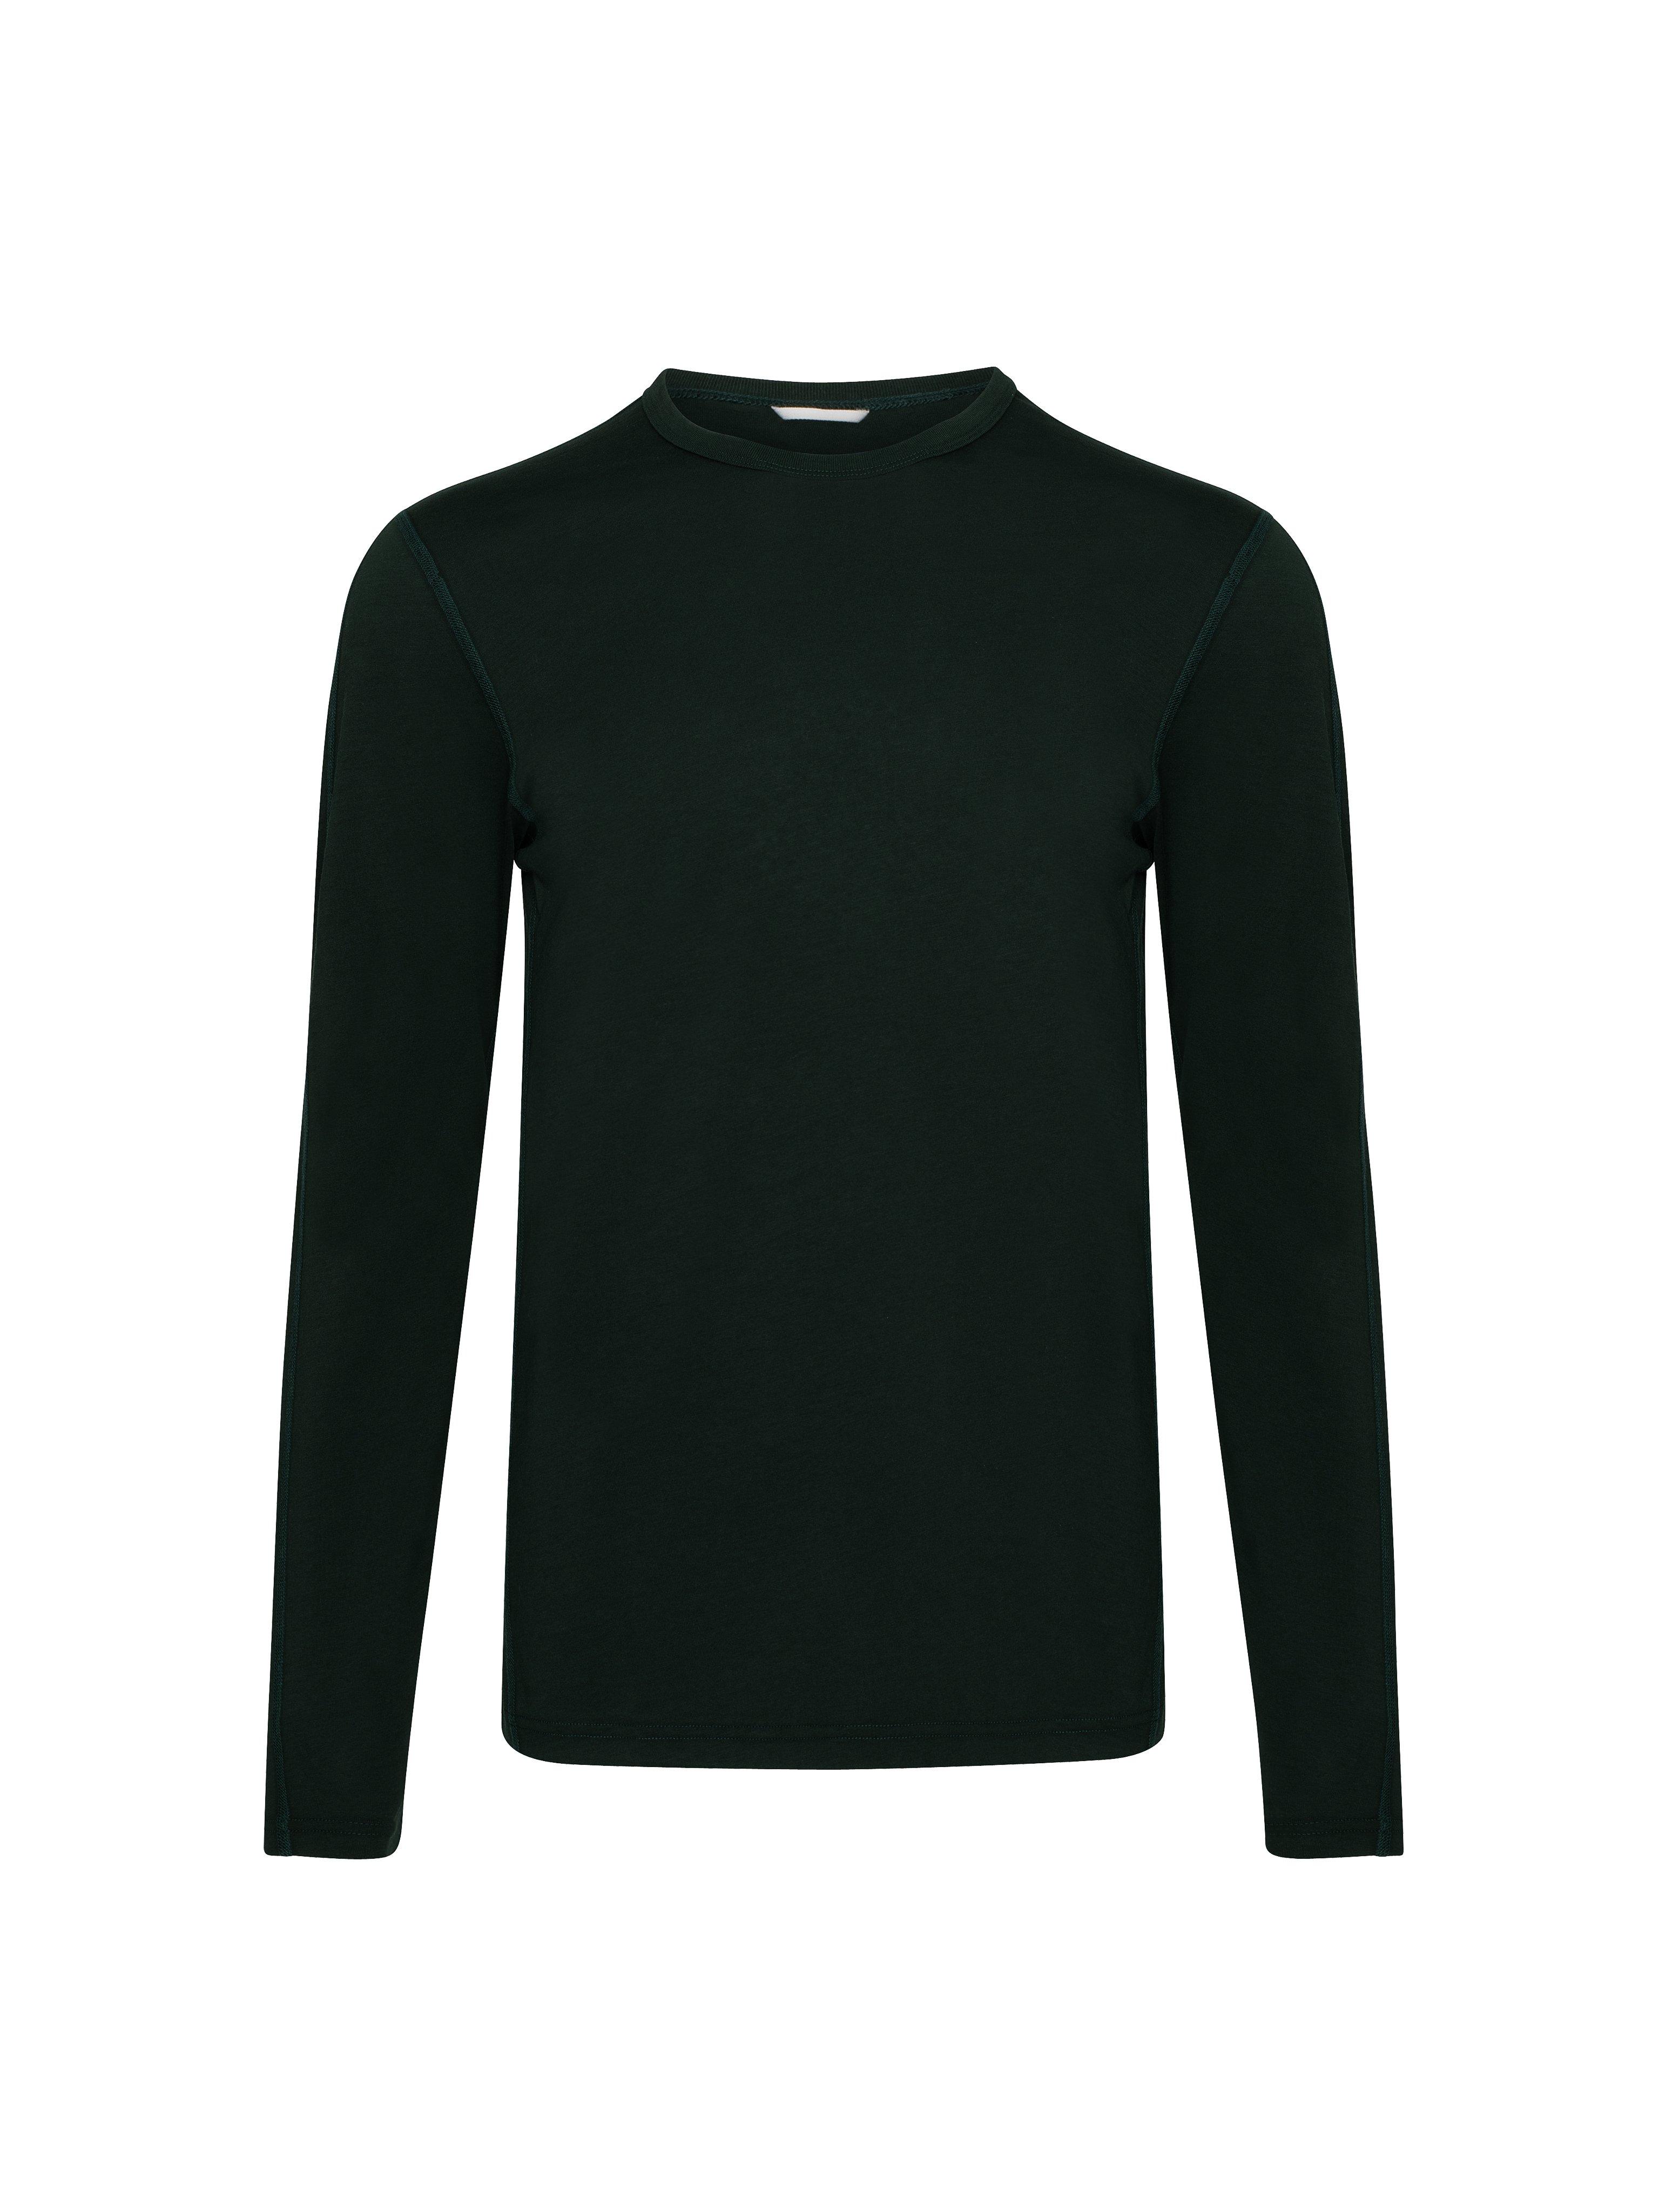 Reigning Champ Knit Ringspun Jersey Ls T-shirt in Forest Green (Green ...